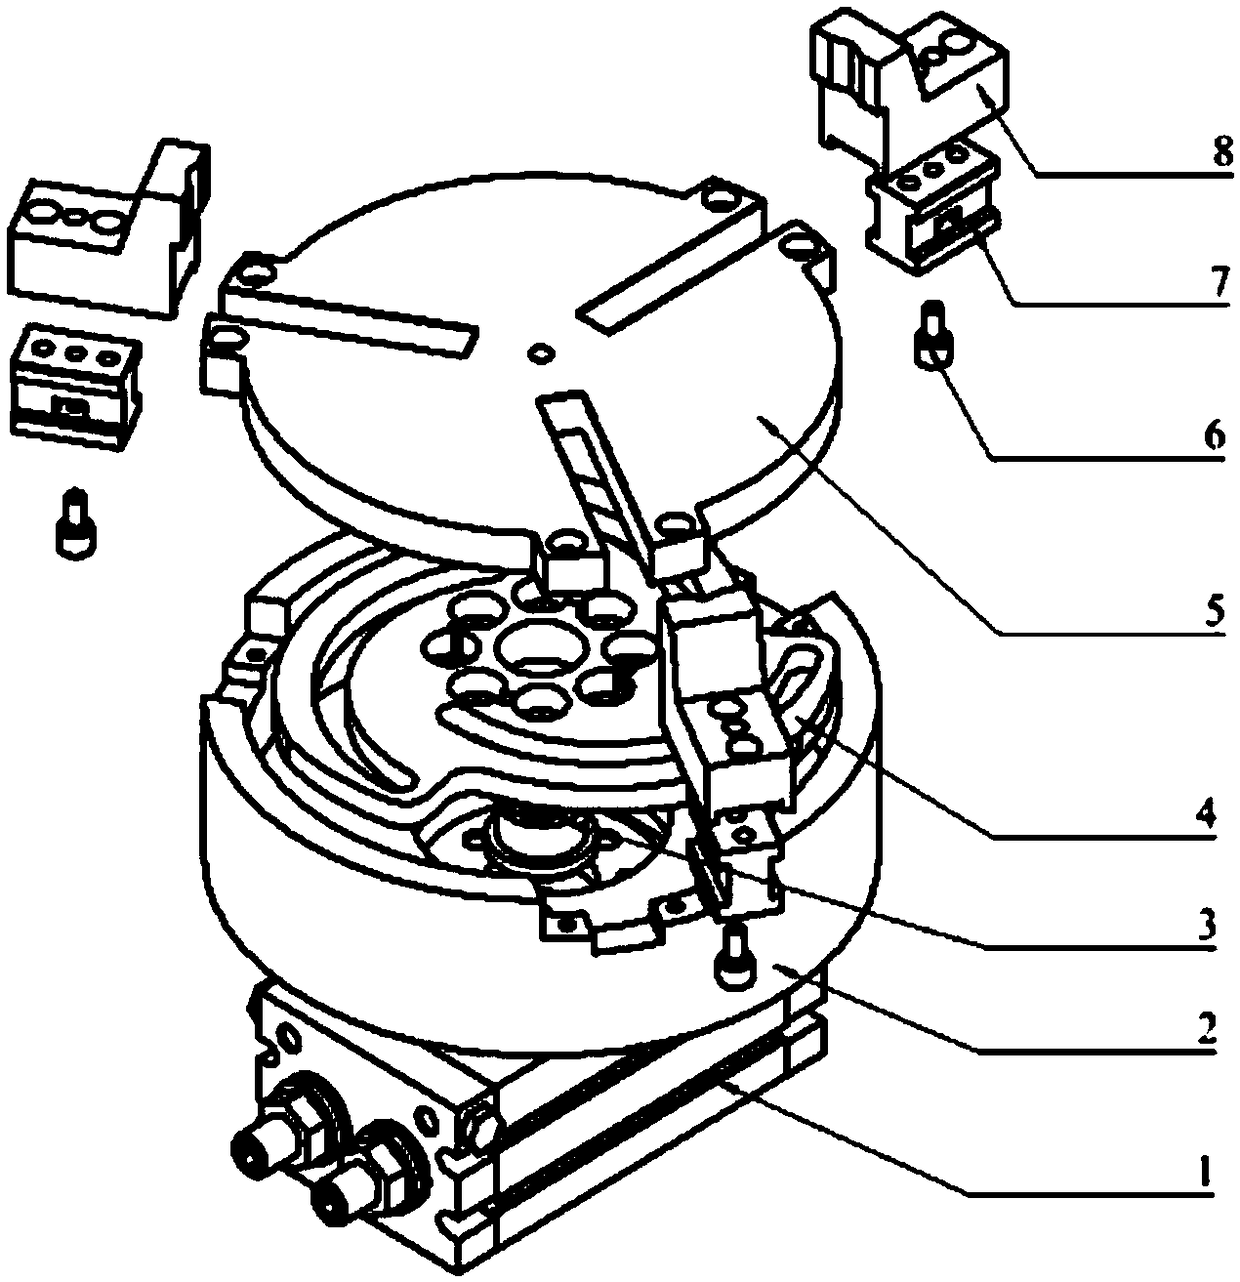 Three-jaw mechanical hand driven by rotary air cylinder